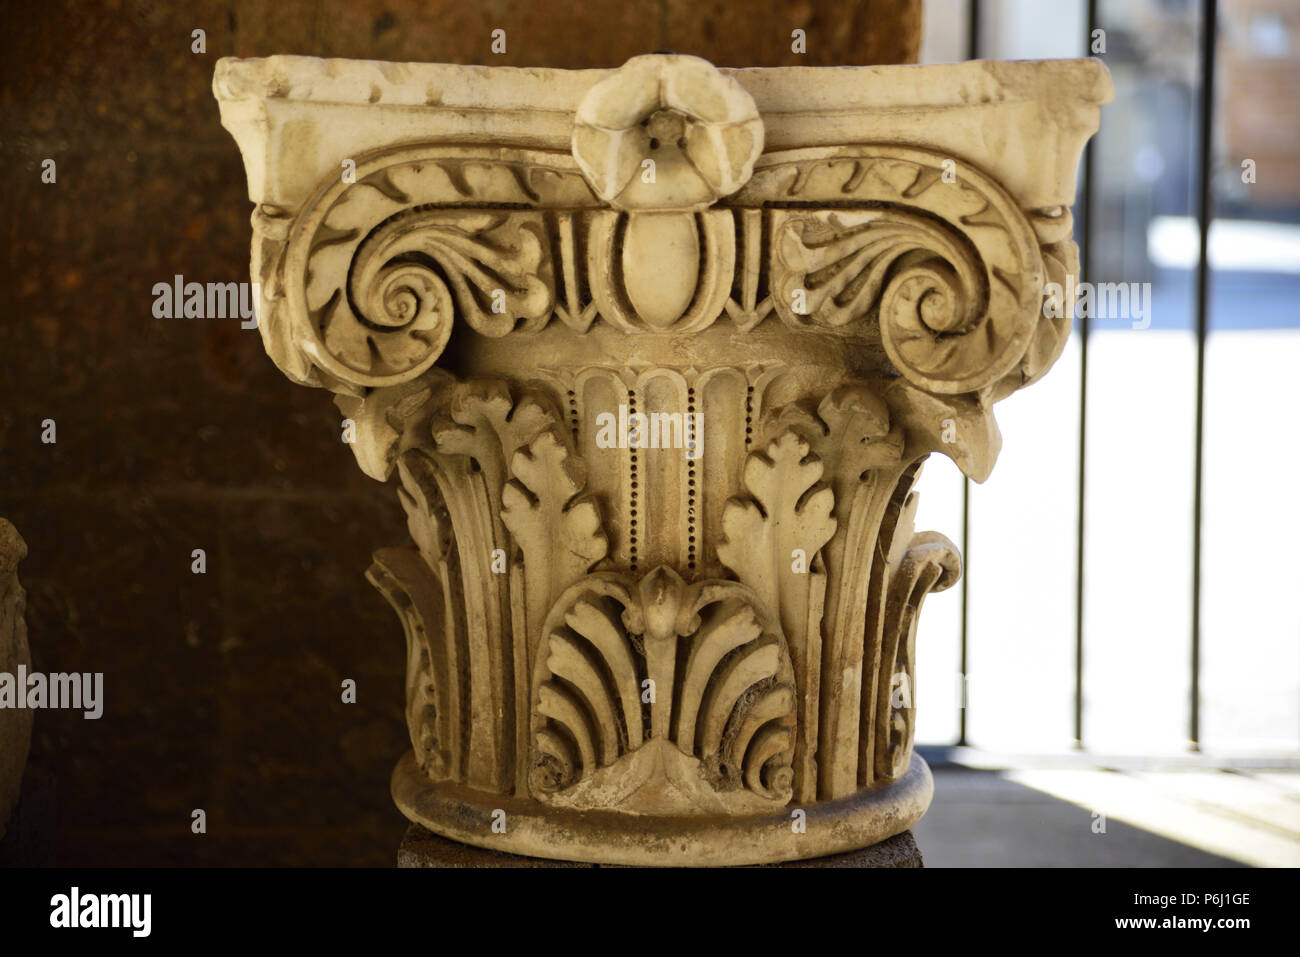 Archaeological find. Upper part (Capitello) of an ancient Etruscan column Orvieto, Umbria, Italy Stock Photo